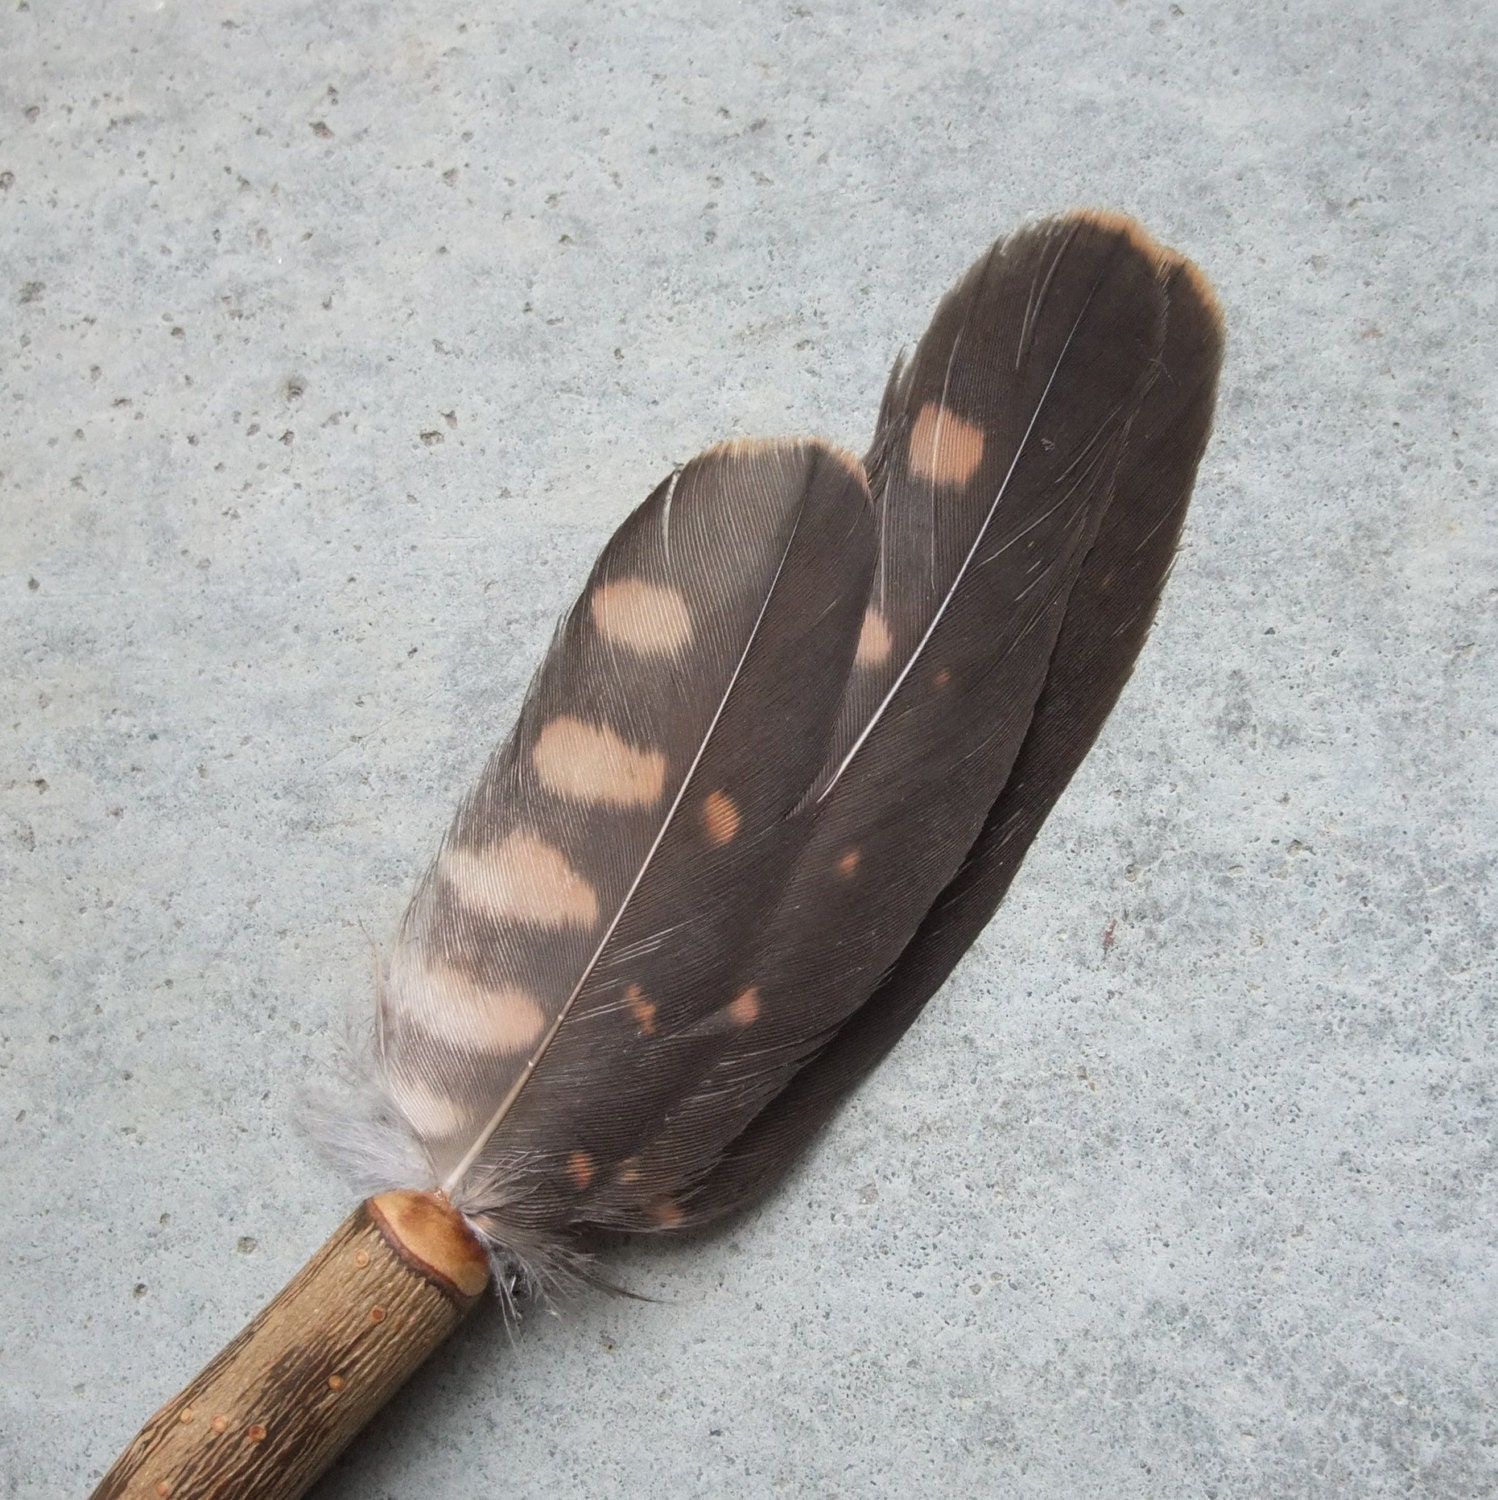 falcon feathers meaning